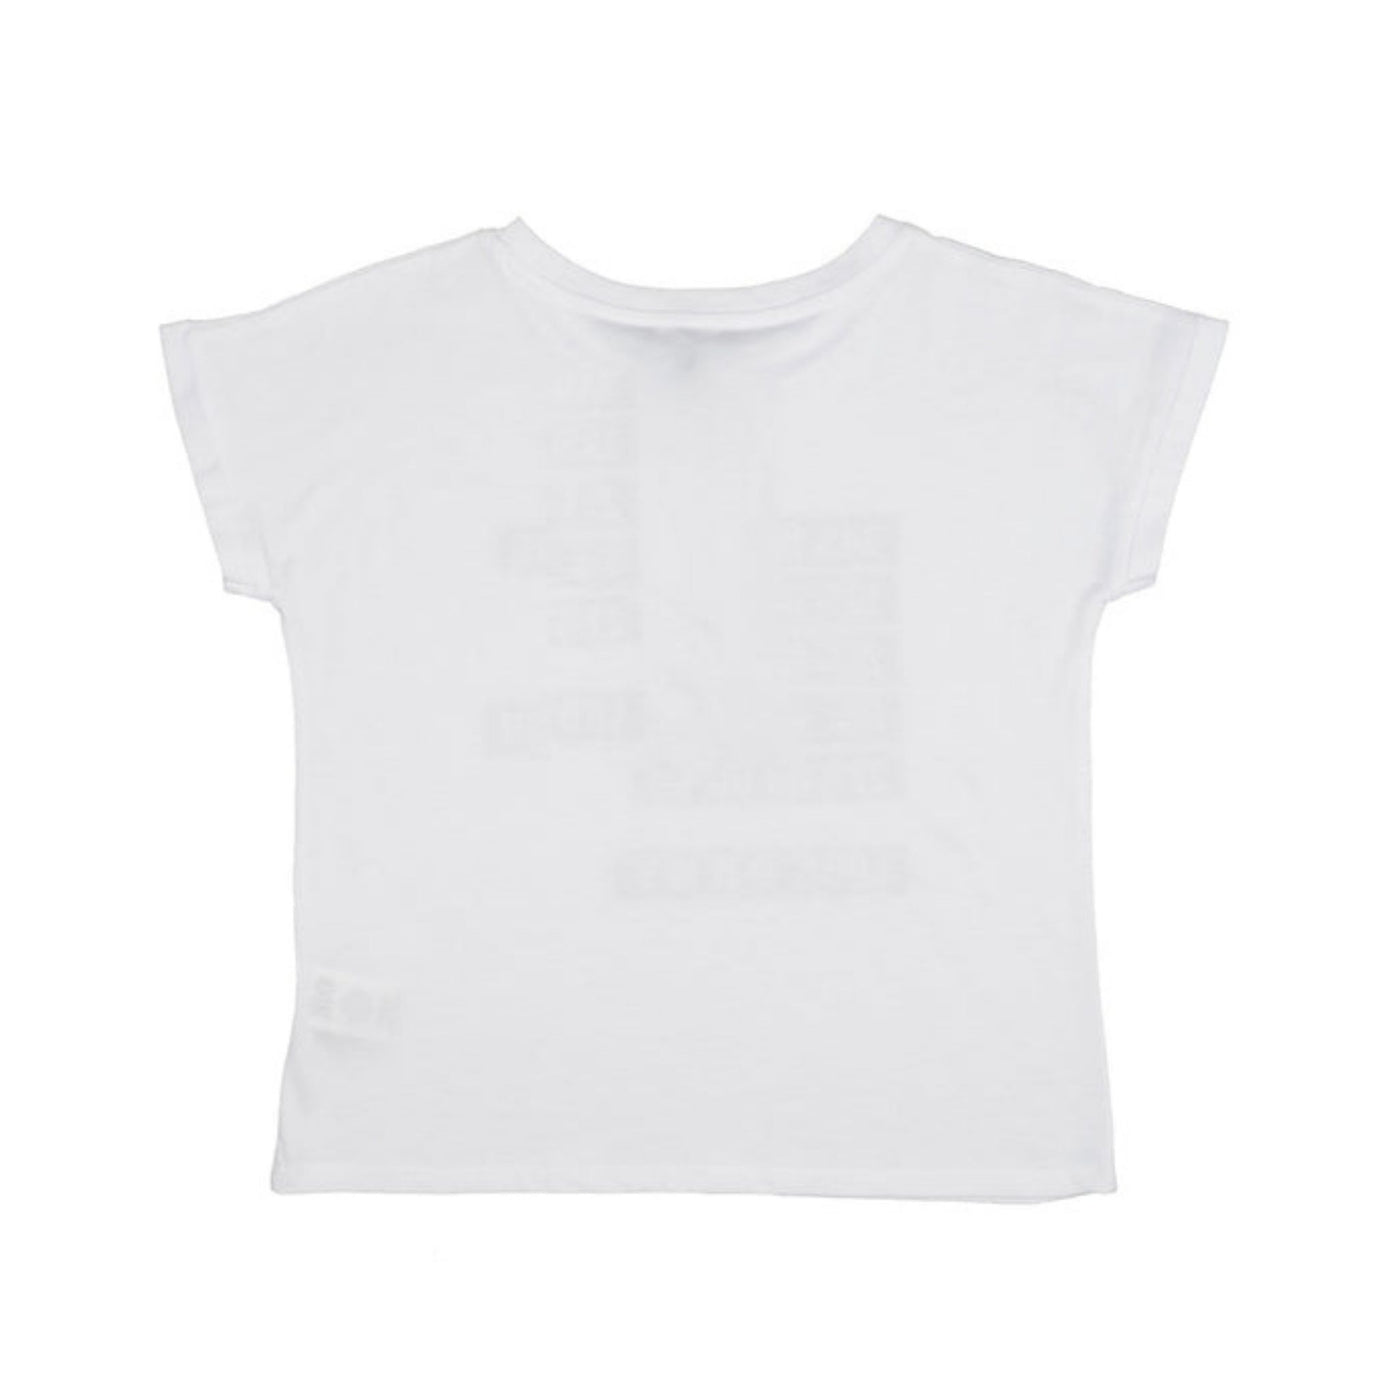 Girl's T-shirt with print on the chest